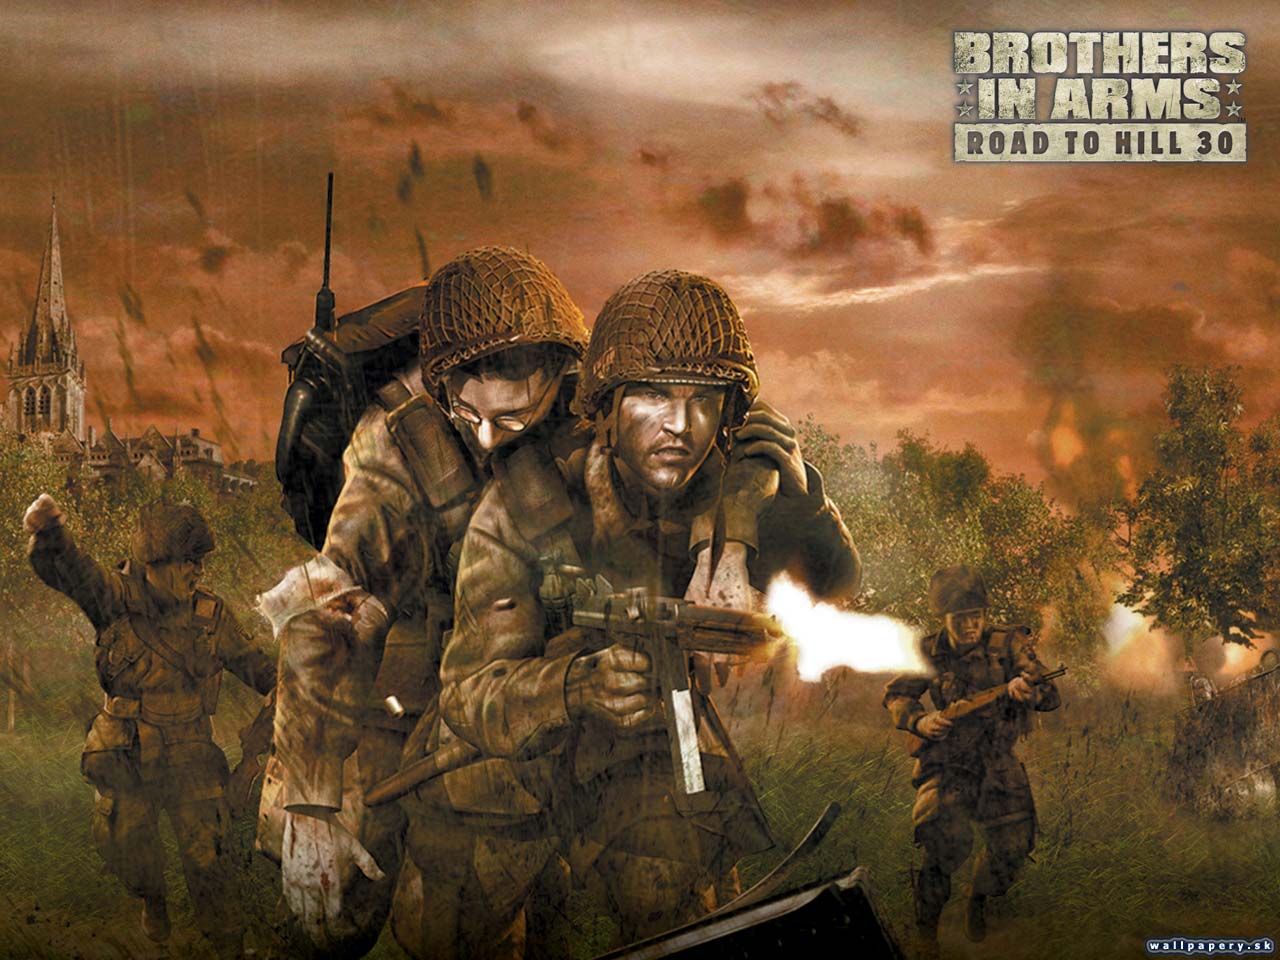 Brothers in Arms: Road to Hill 30 - wallpaper 10